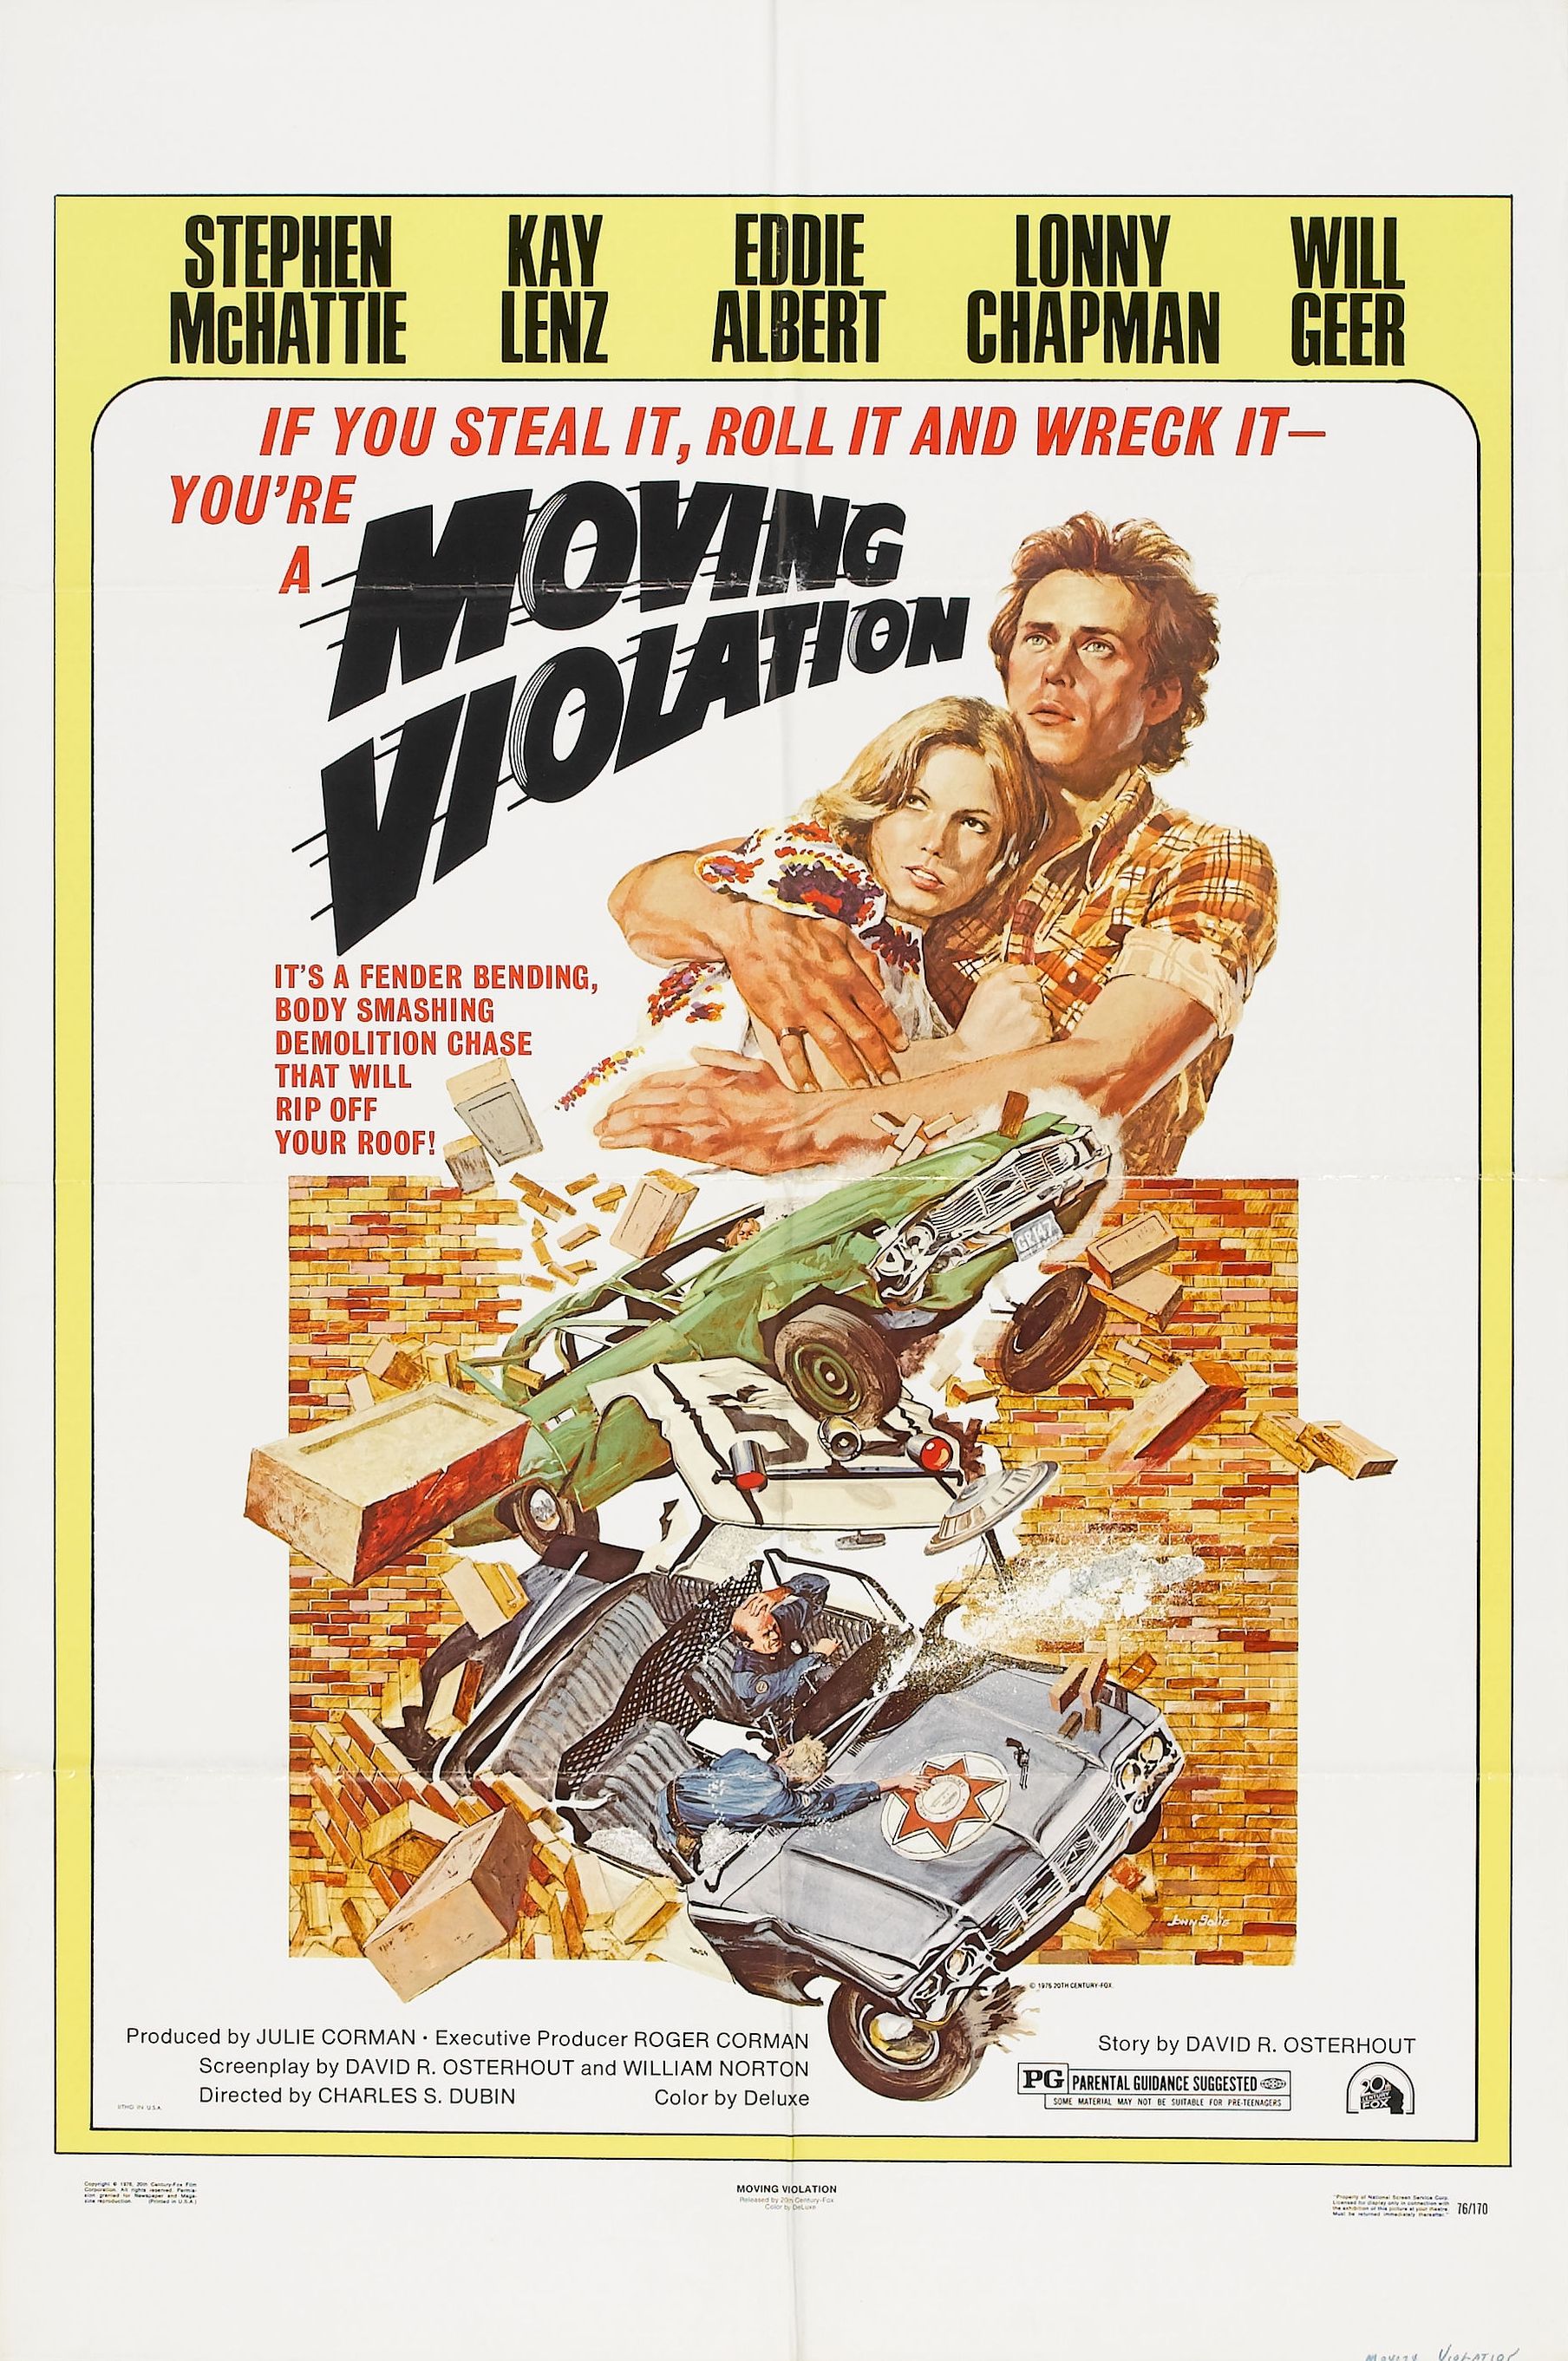 moving violations movie - Stephen Kay Eddie Lonny Will Albert Chapman Geer If You Steal It, Roll It And Wreck It Chatti You'Re Loving Volant Didation Itsafe Qe Bendis Denolition Onas Your Roof